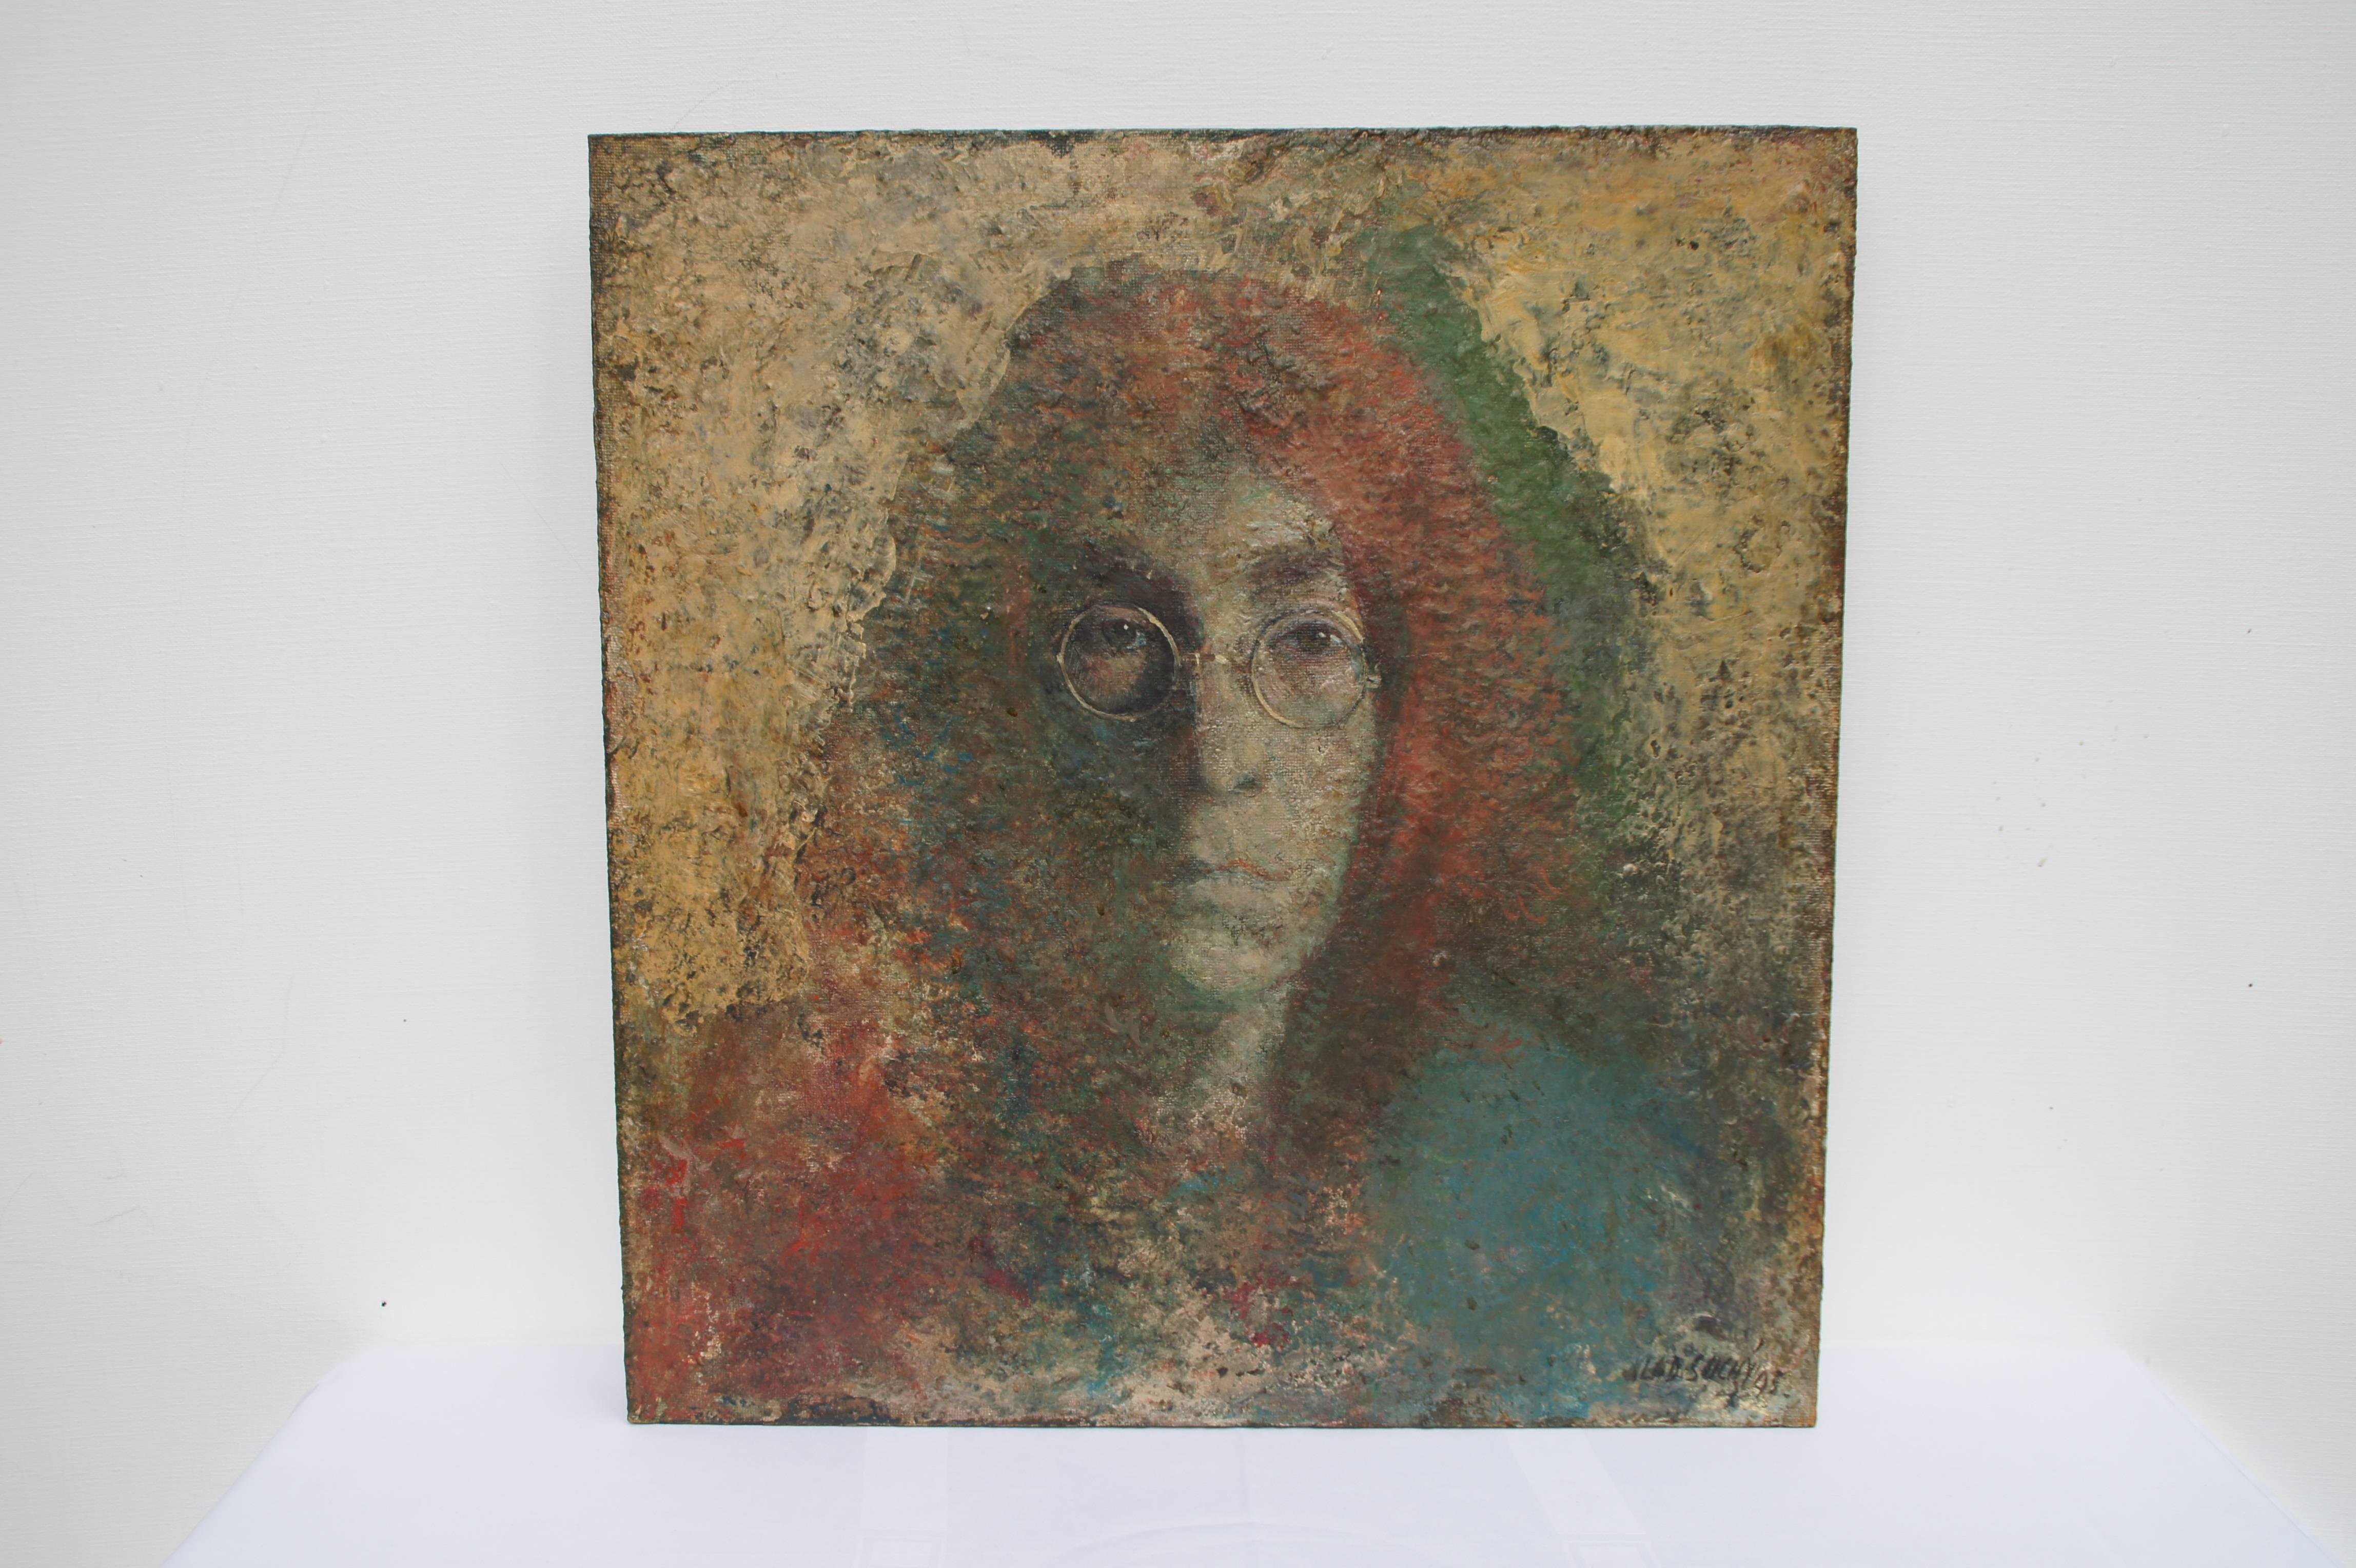 Painted Painting Depicting John Lennon, Signed by Vladimir Suchy